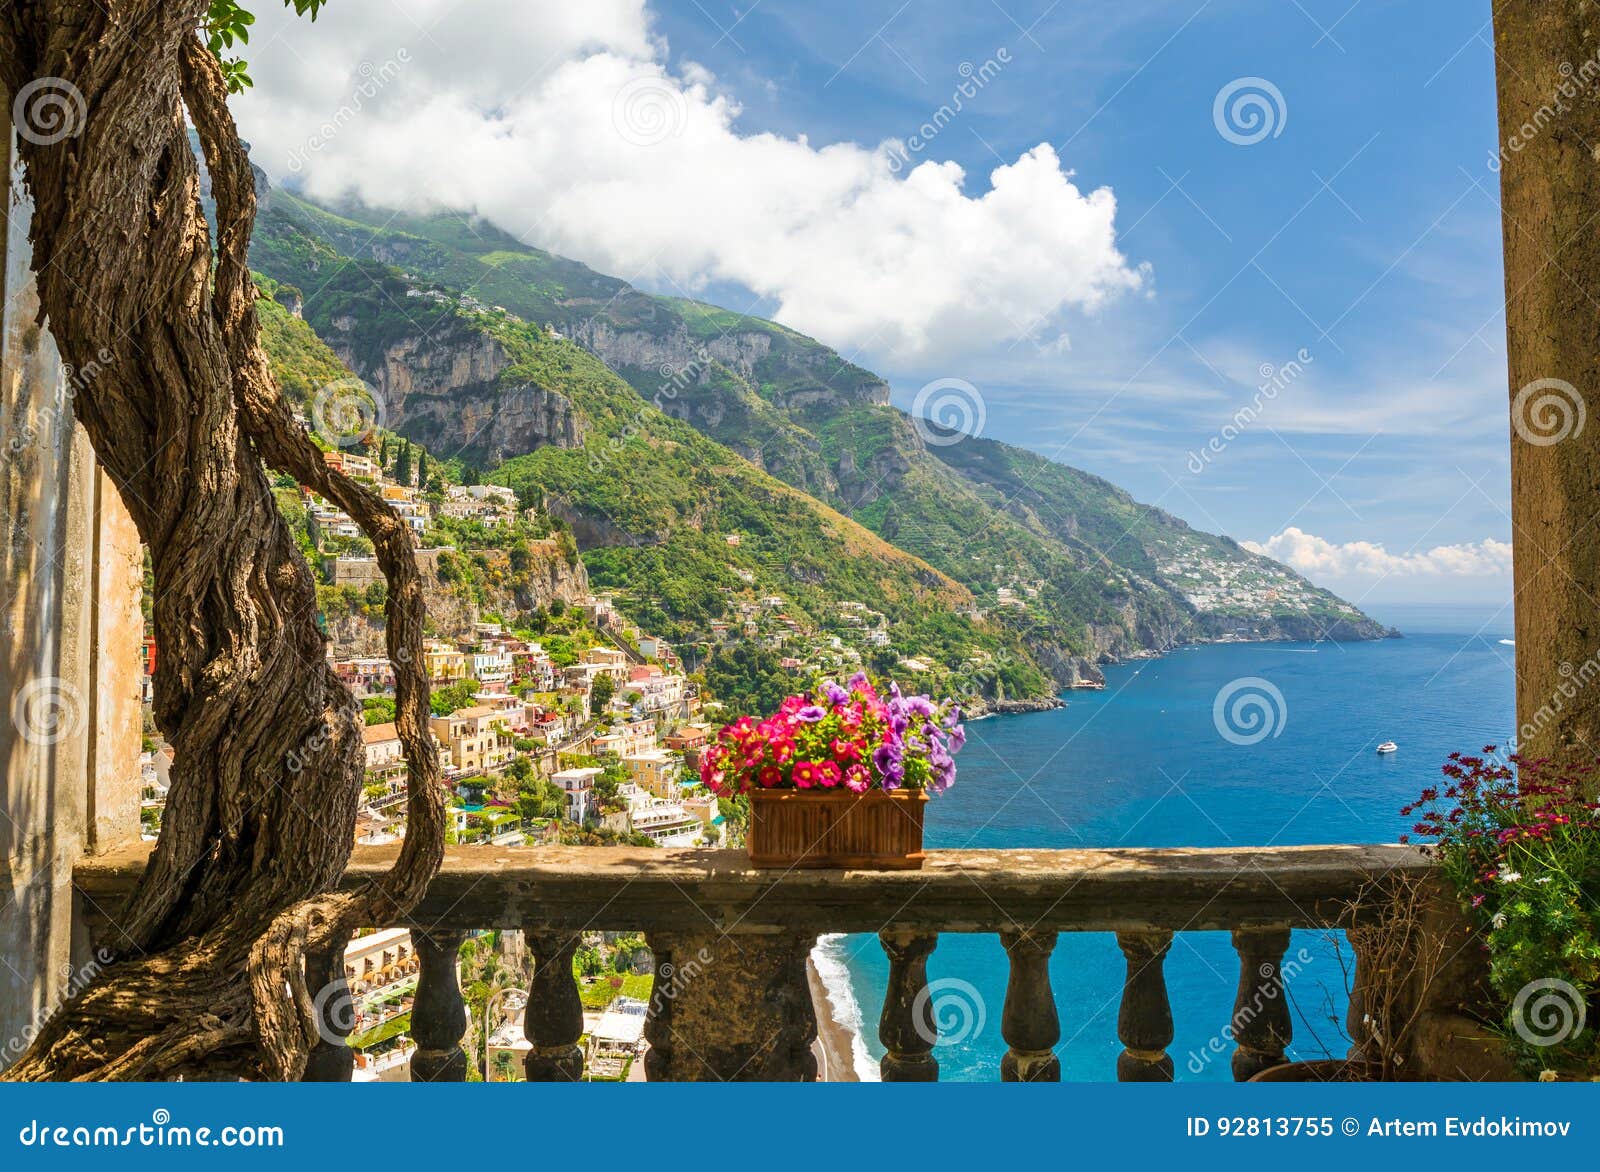 beautiful view of the town of positano from antique terrace with flowers